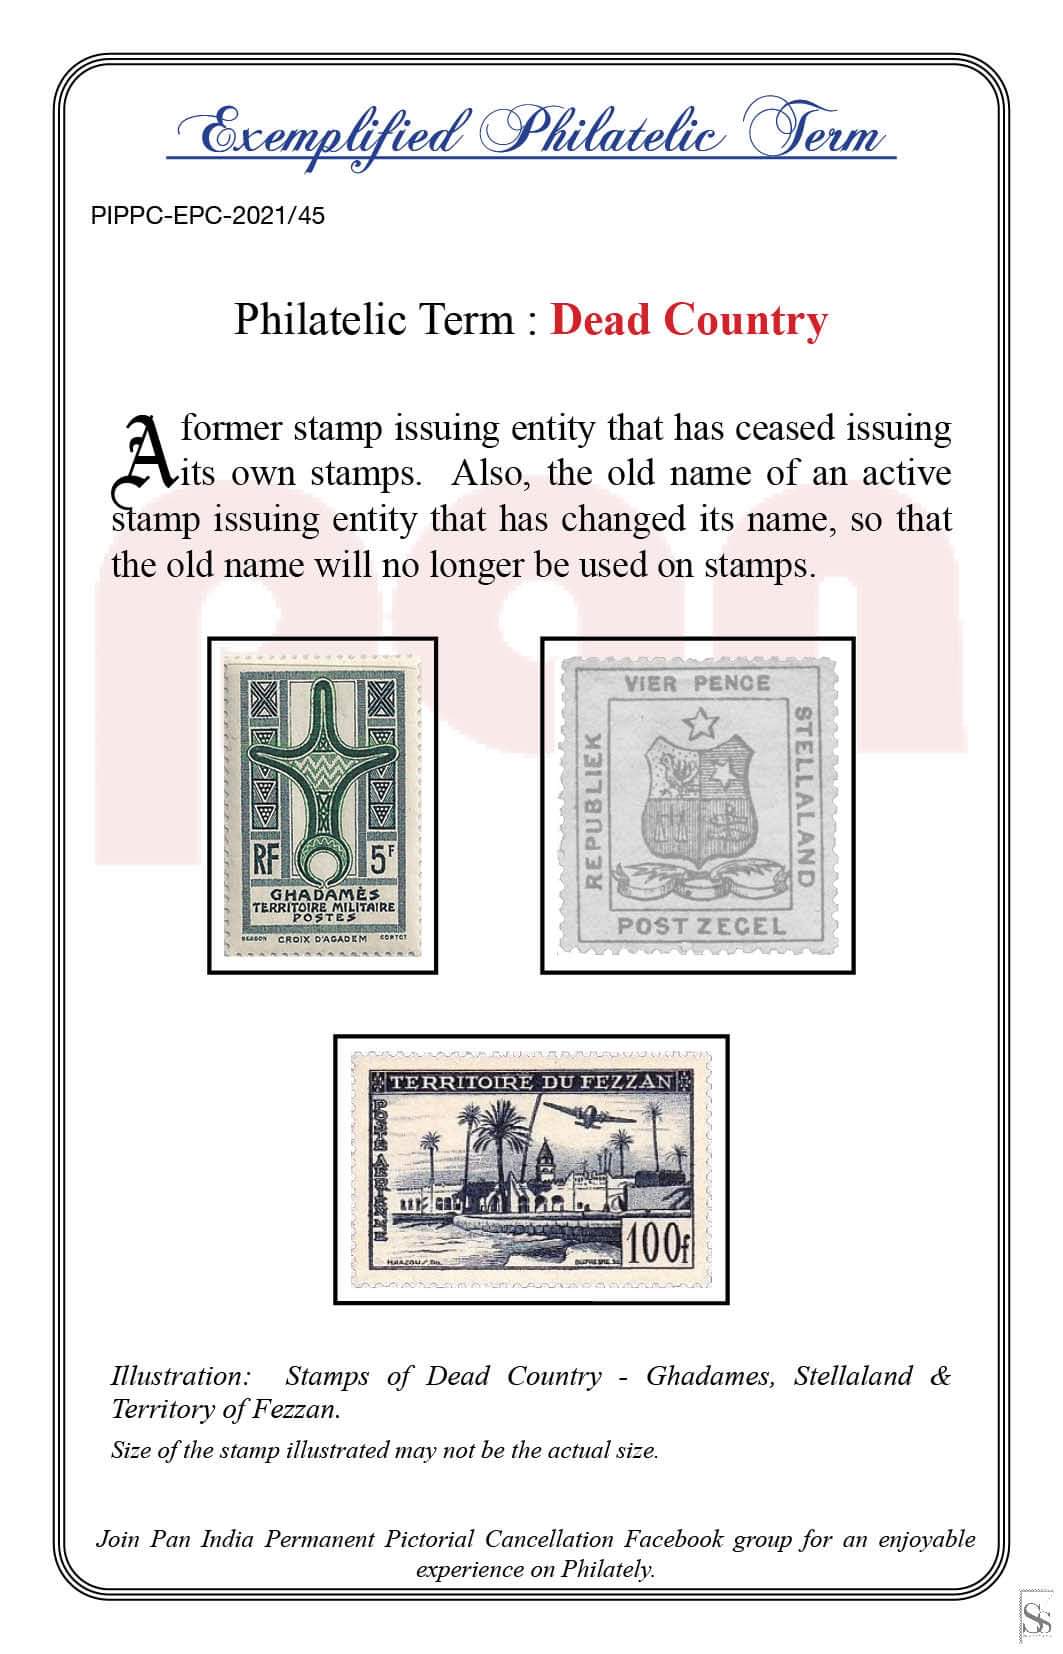 45. Today's Exemplified Philatelic term-Dead Country